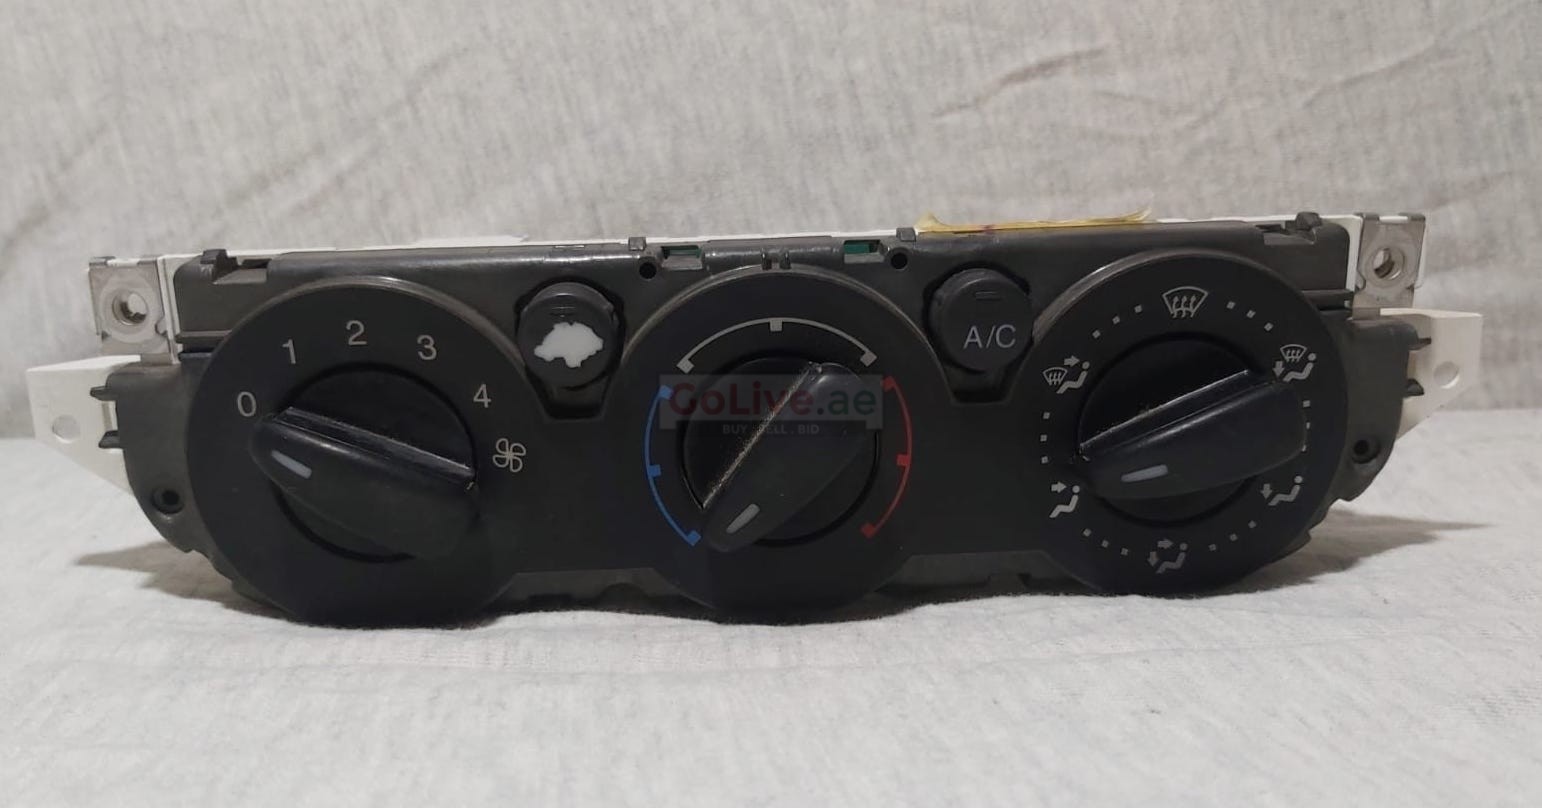 FORD FOCUS 2008 AIR CONDITIONER PANEL PART NO 7M5T19980AA ( Genuine Used FORD Parts )